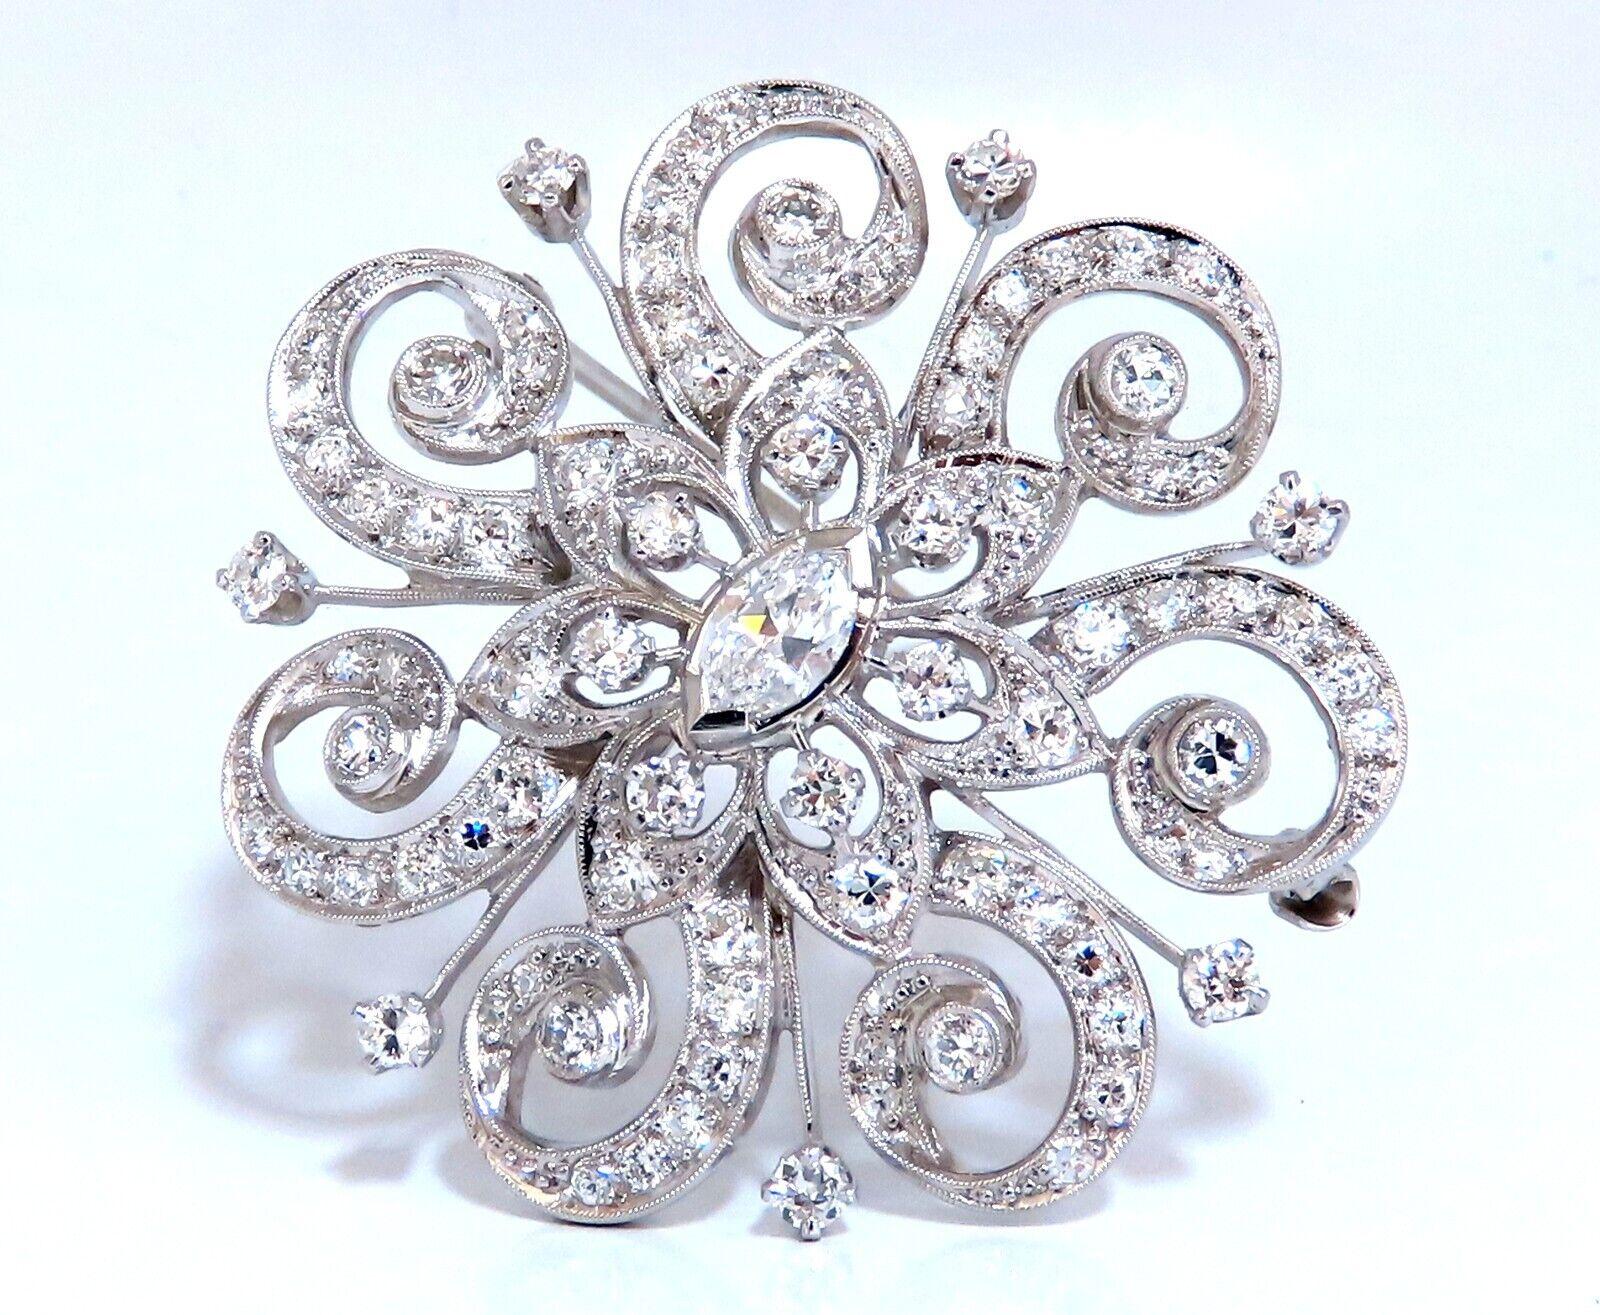 Vintage Platinum Brooch Pin

.50ct natural marquise 

&

1.40ct natural round diamonds

G-color Vs-2 Clarity

38mm diameter

Handmade 

Platinum 

18 Grams.

$21000 Appraisal to accompany